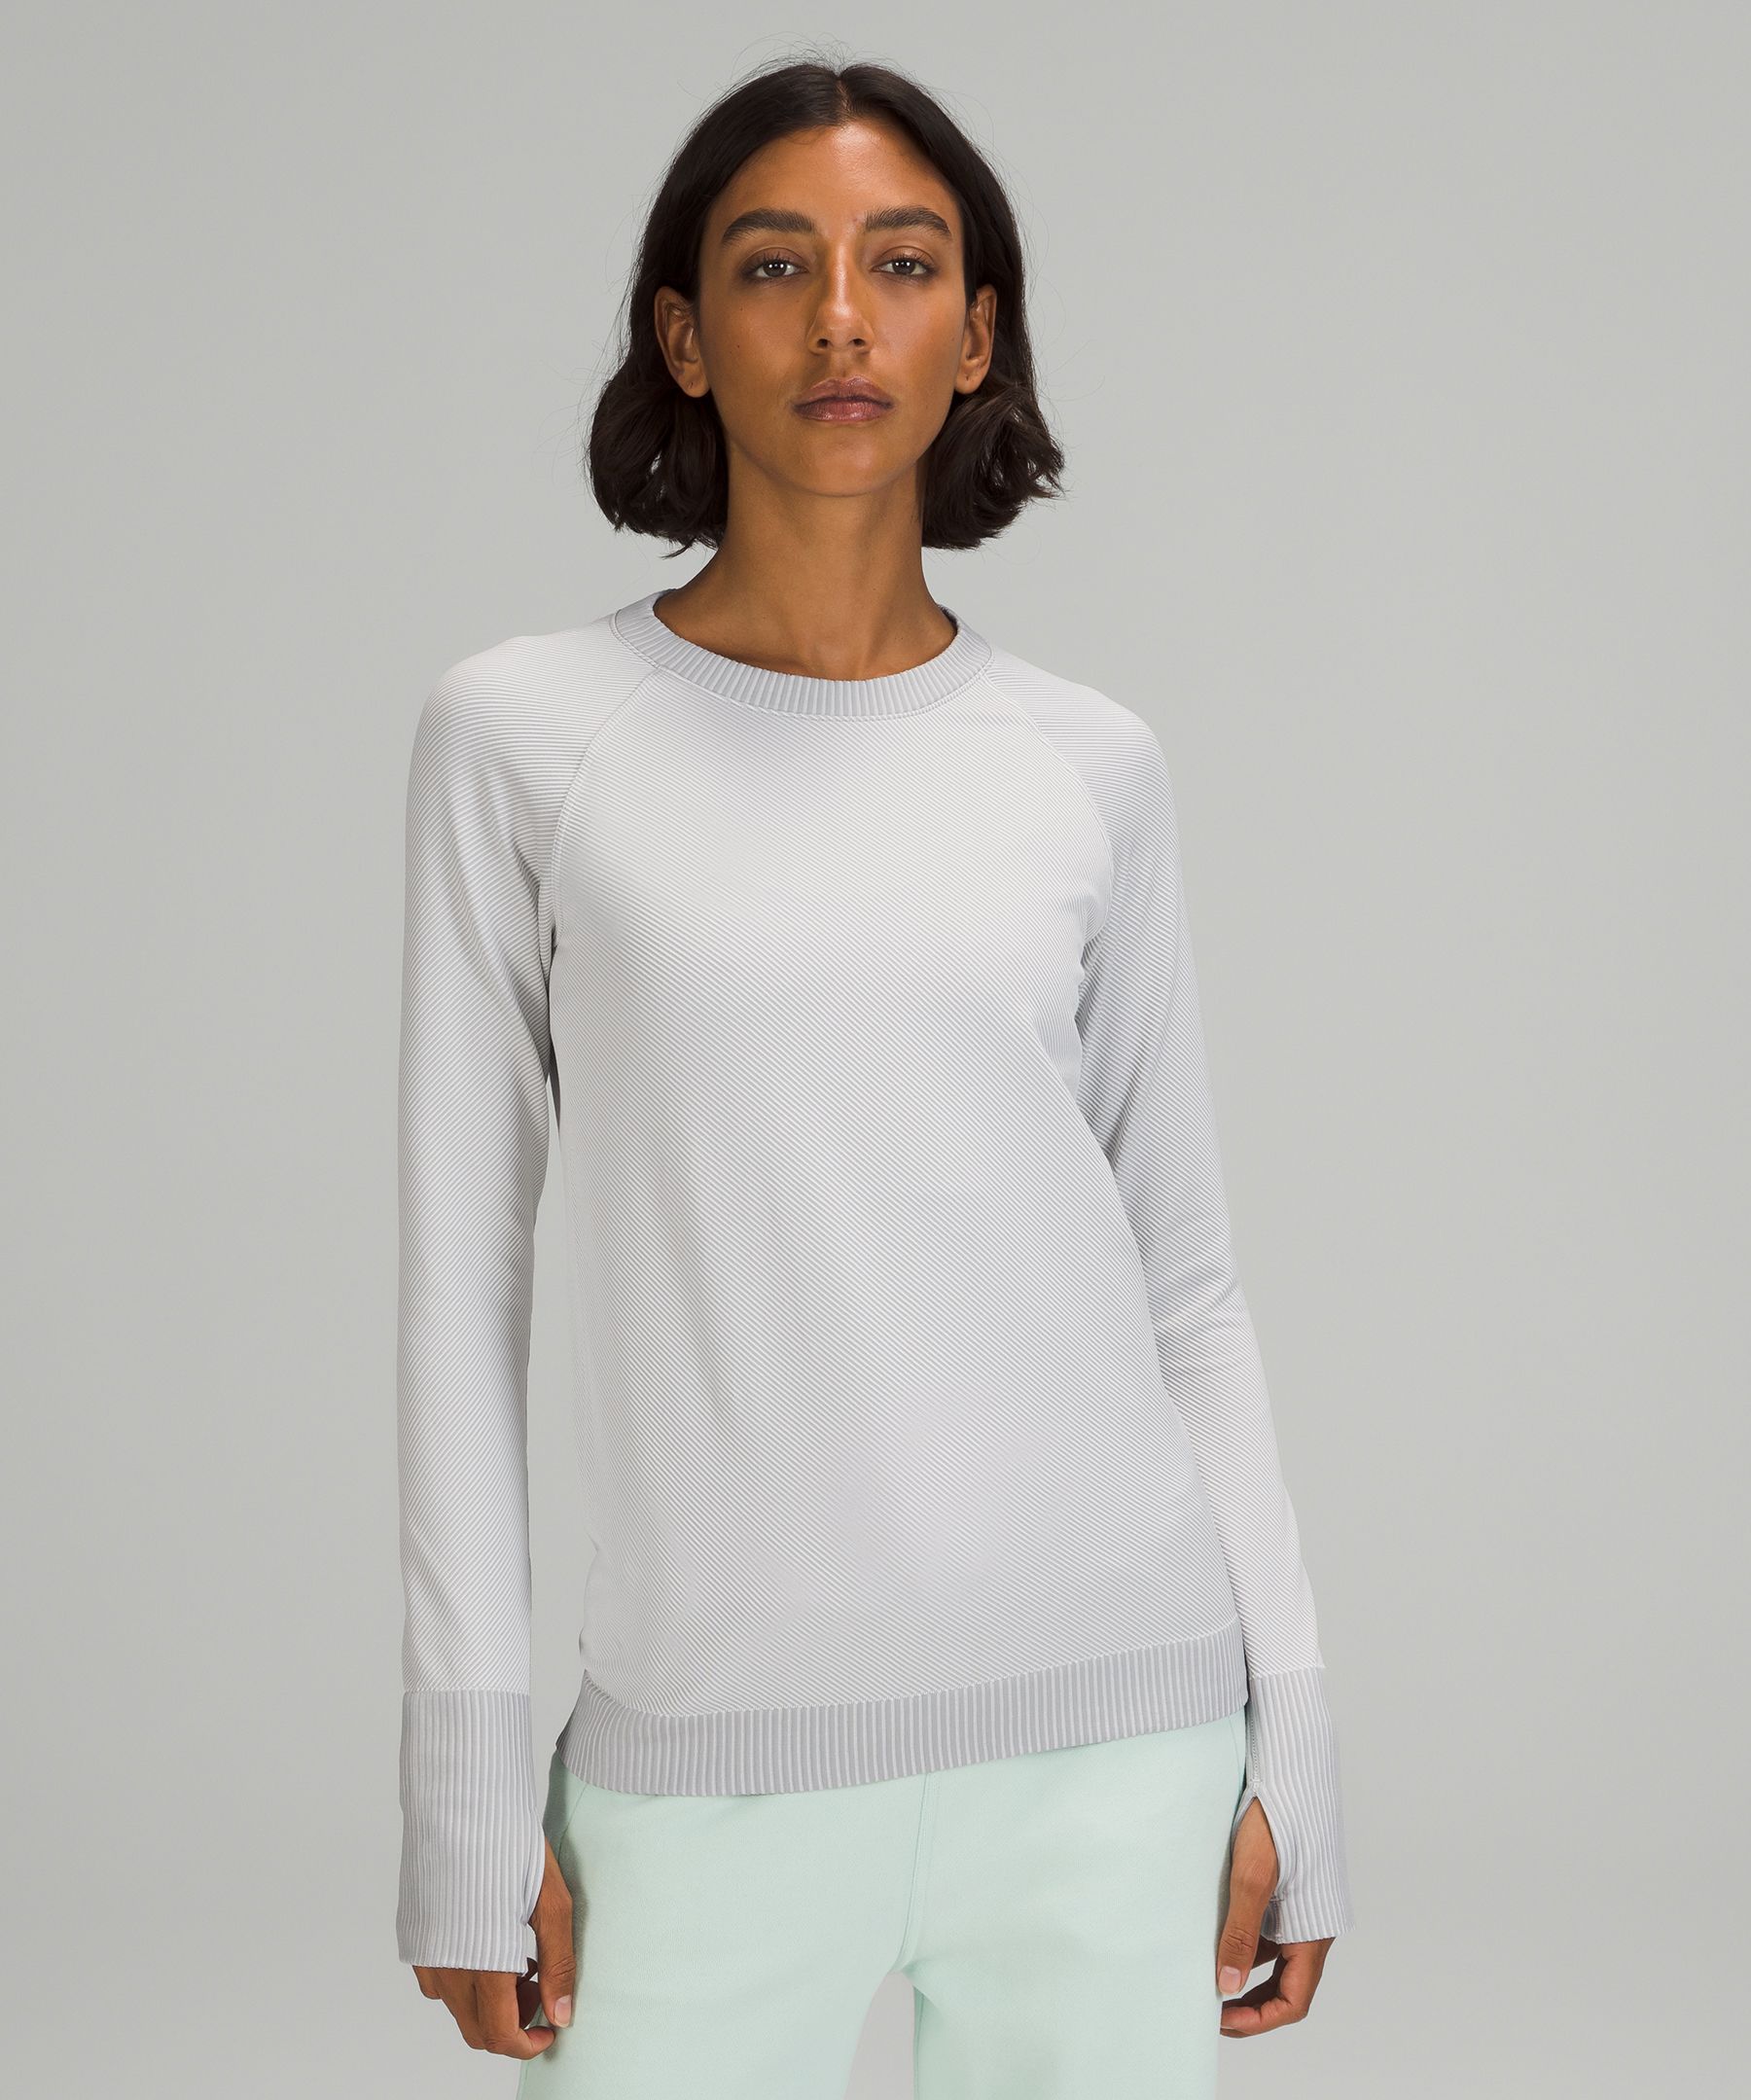 Lululemon Rest Less Pullover In Diagonal Rib Silver Drop/white